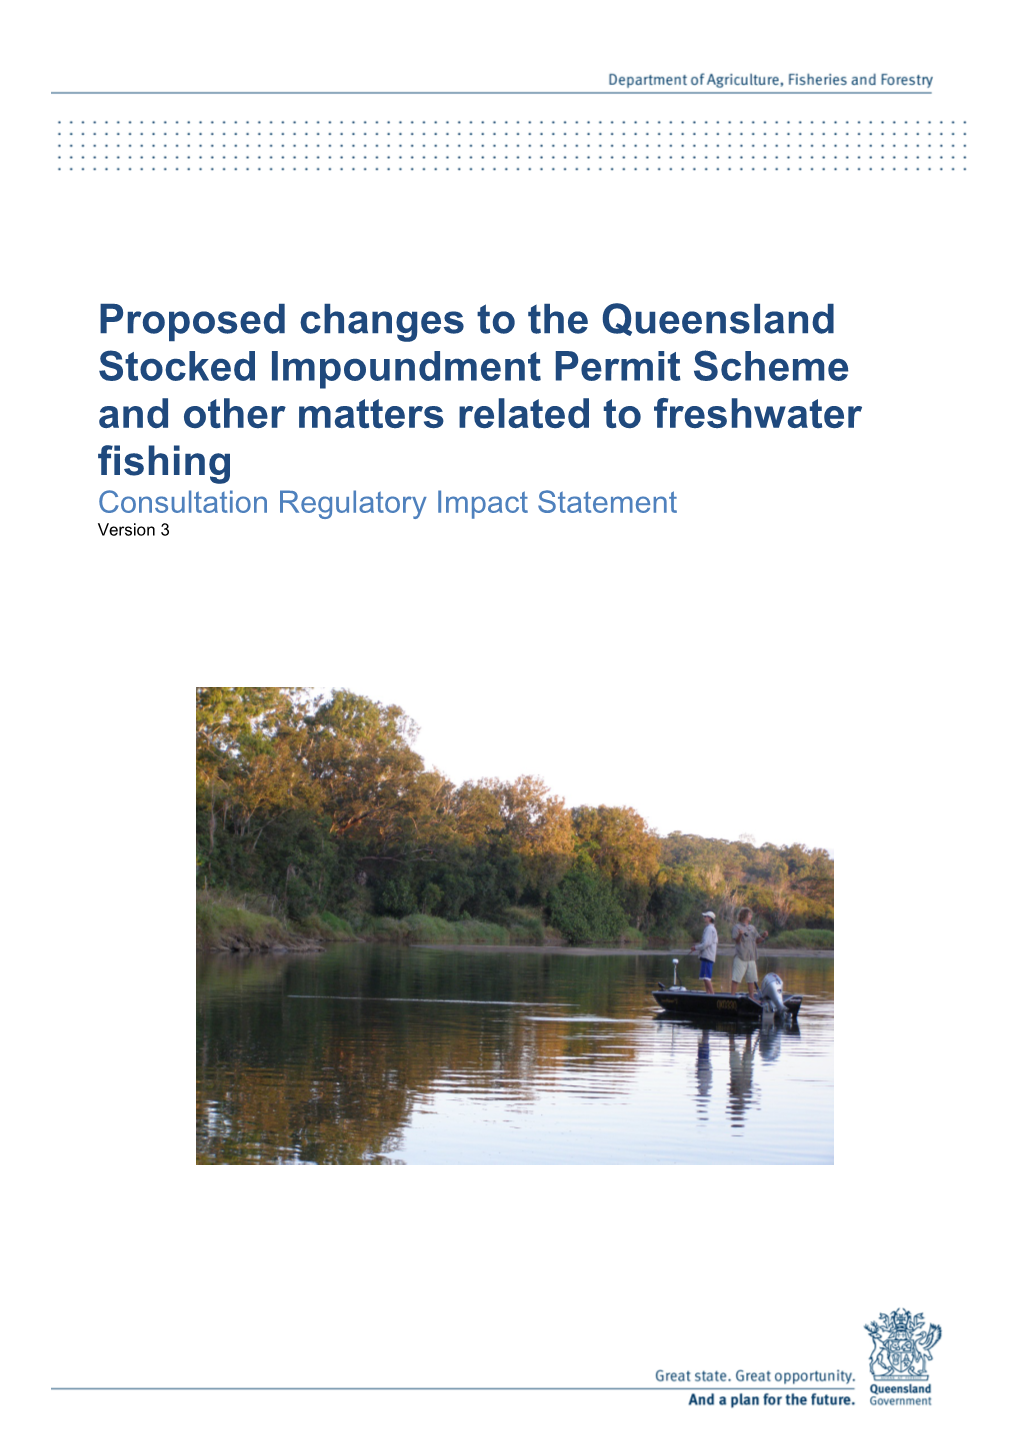 Proposed Changes to the Queensland Stocked Impoundment Permit